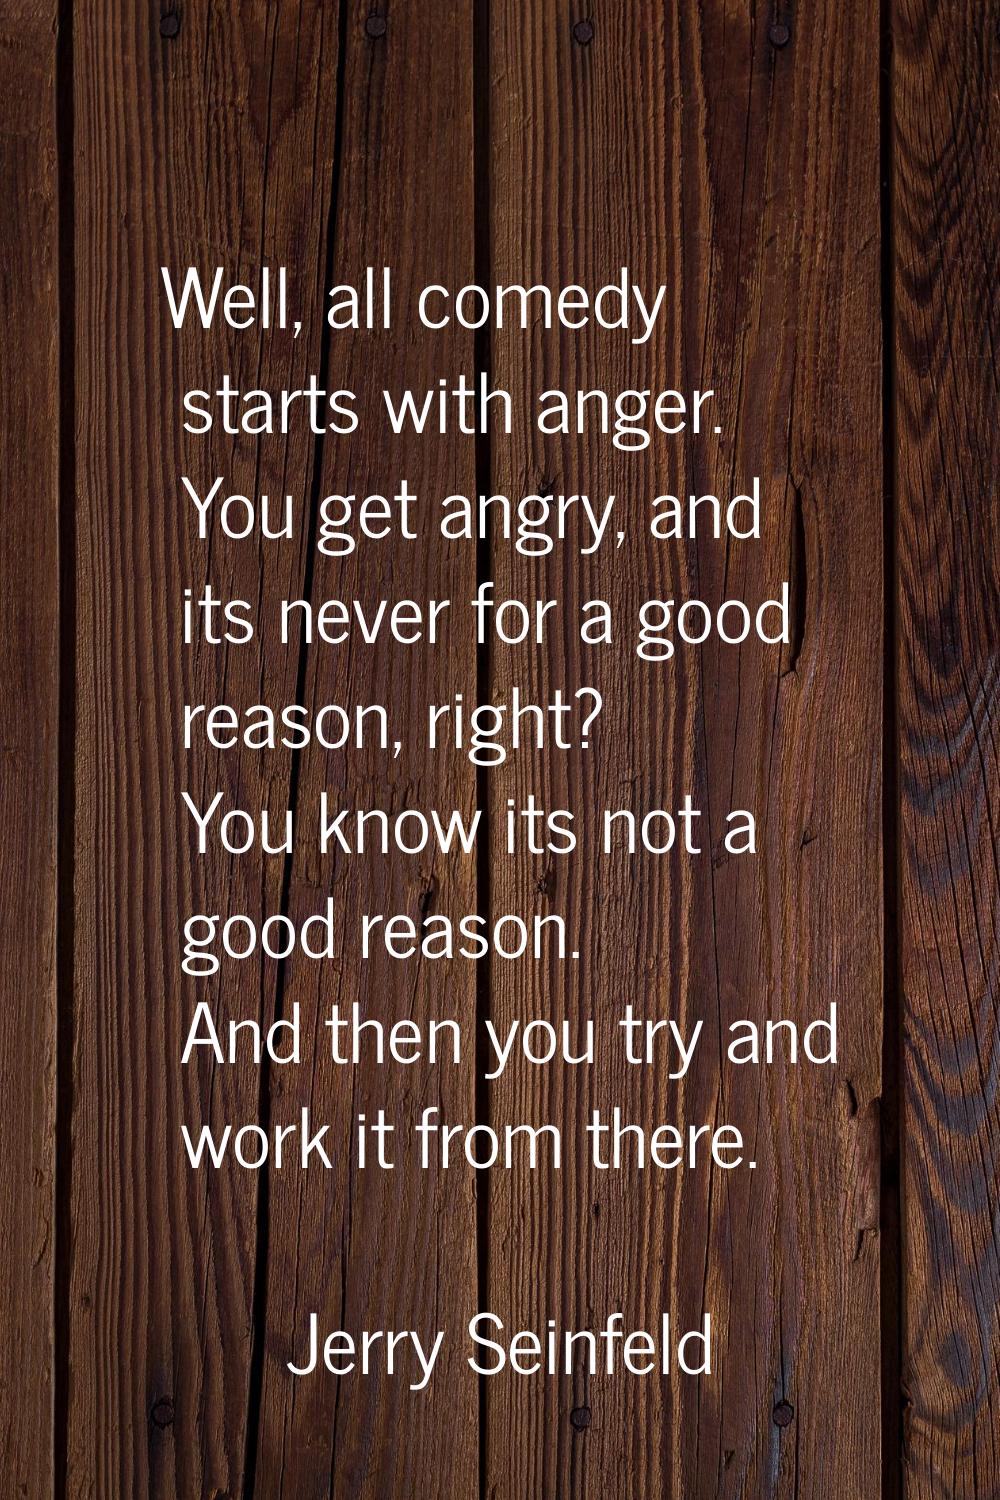 Well, all comedy starts with anger. You get angry, and its never for a good reason, right? You know